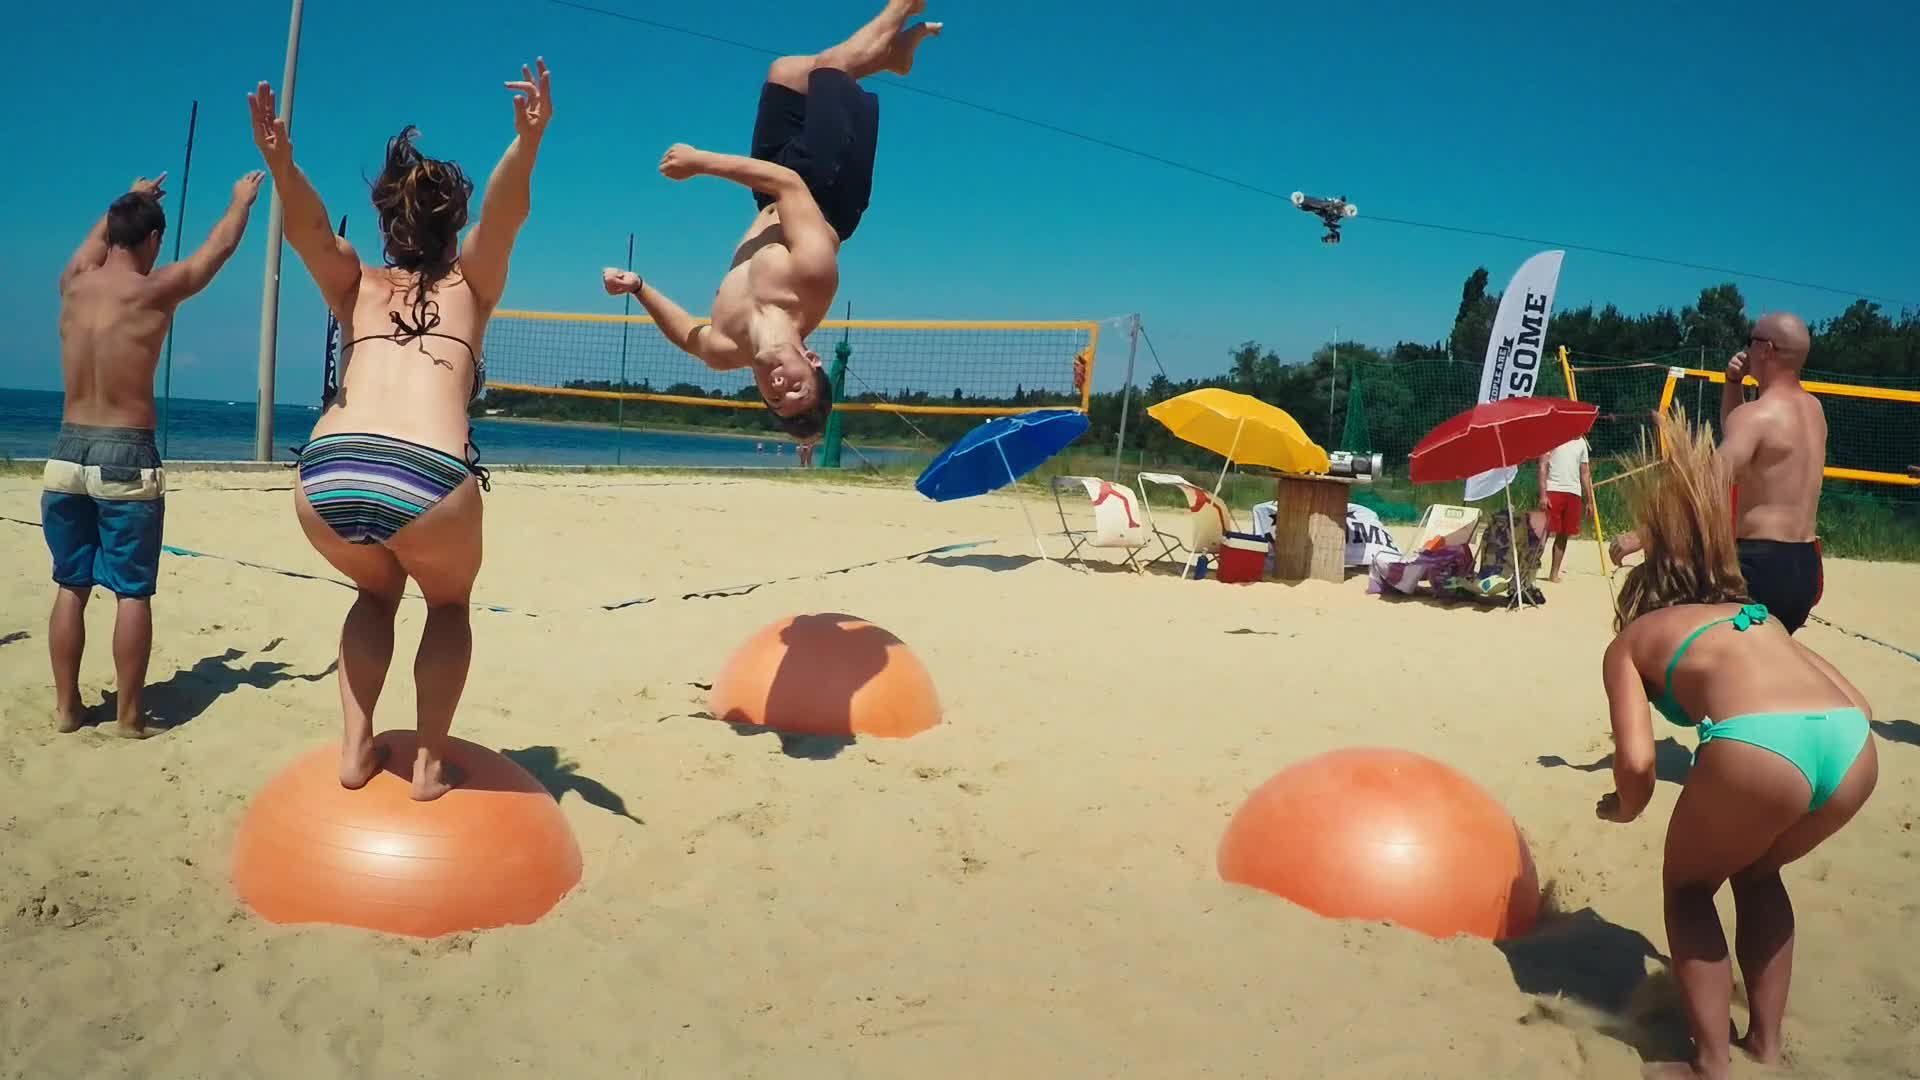 Exercise Ball at the Beach Flips and Fails | Jukin Media